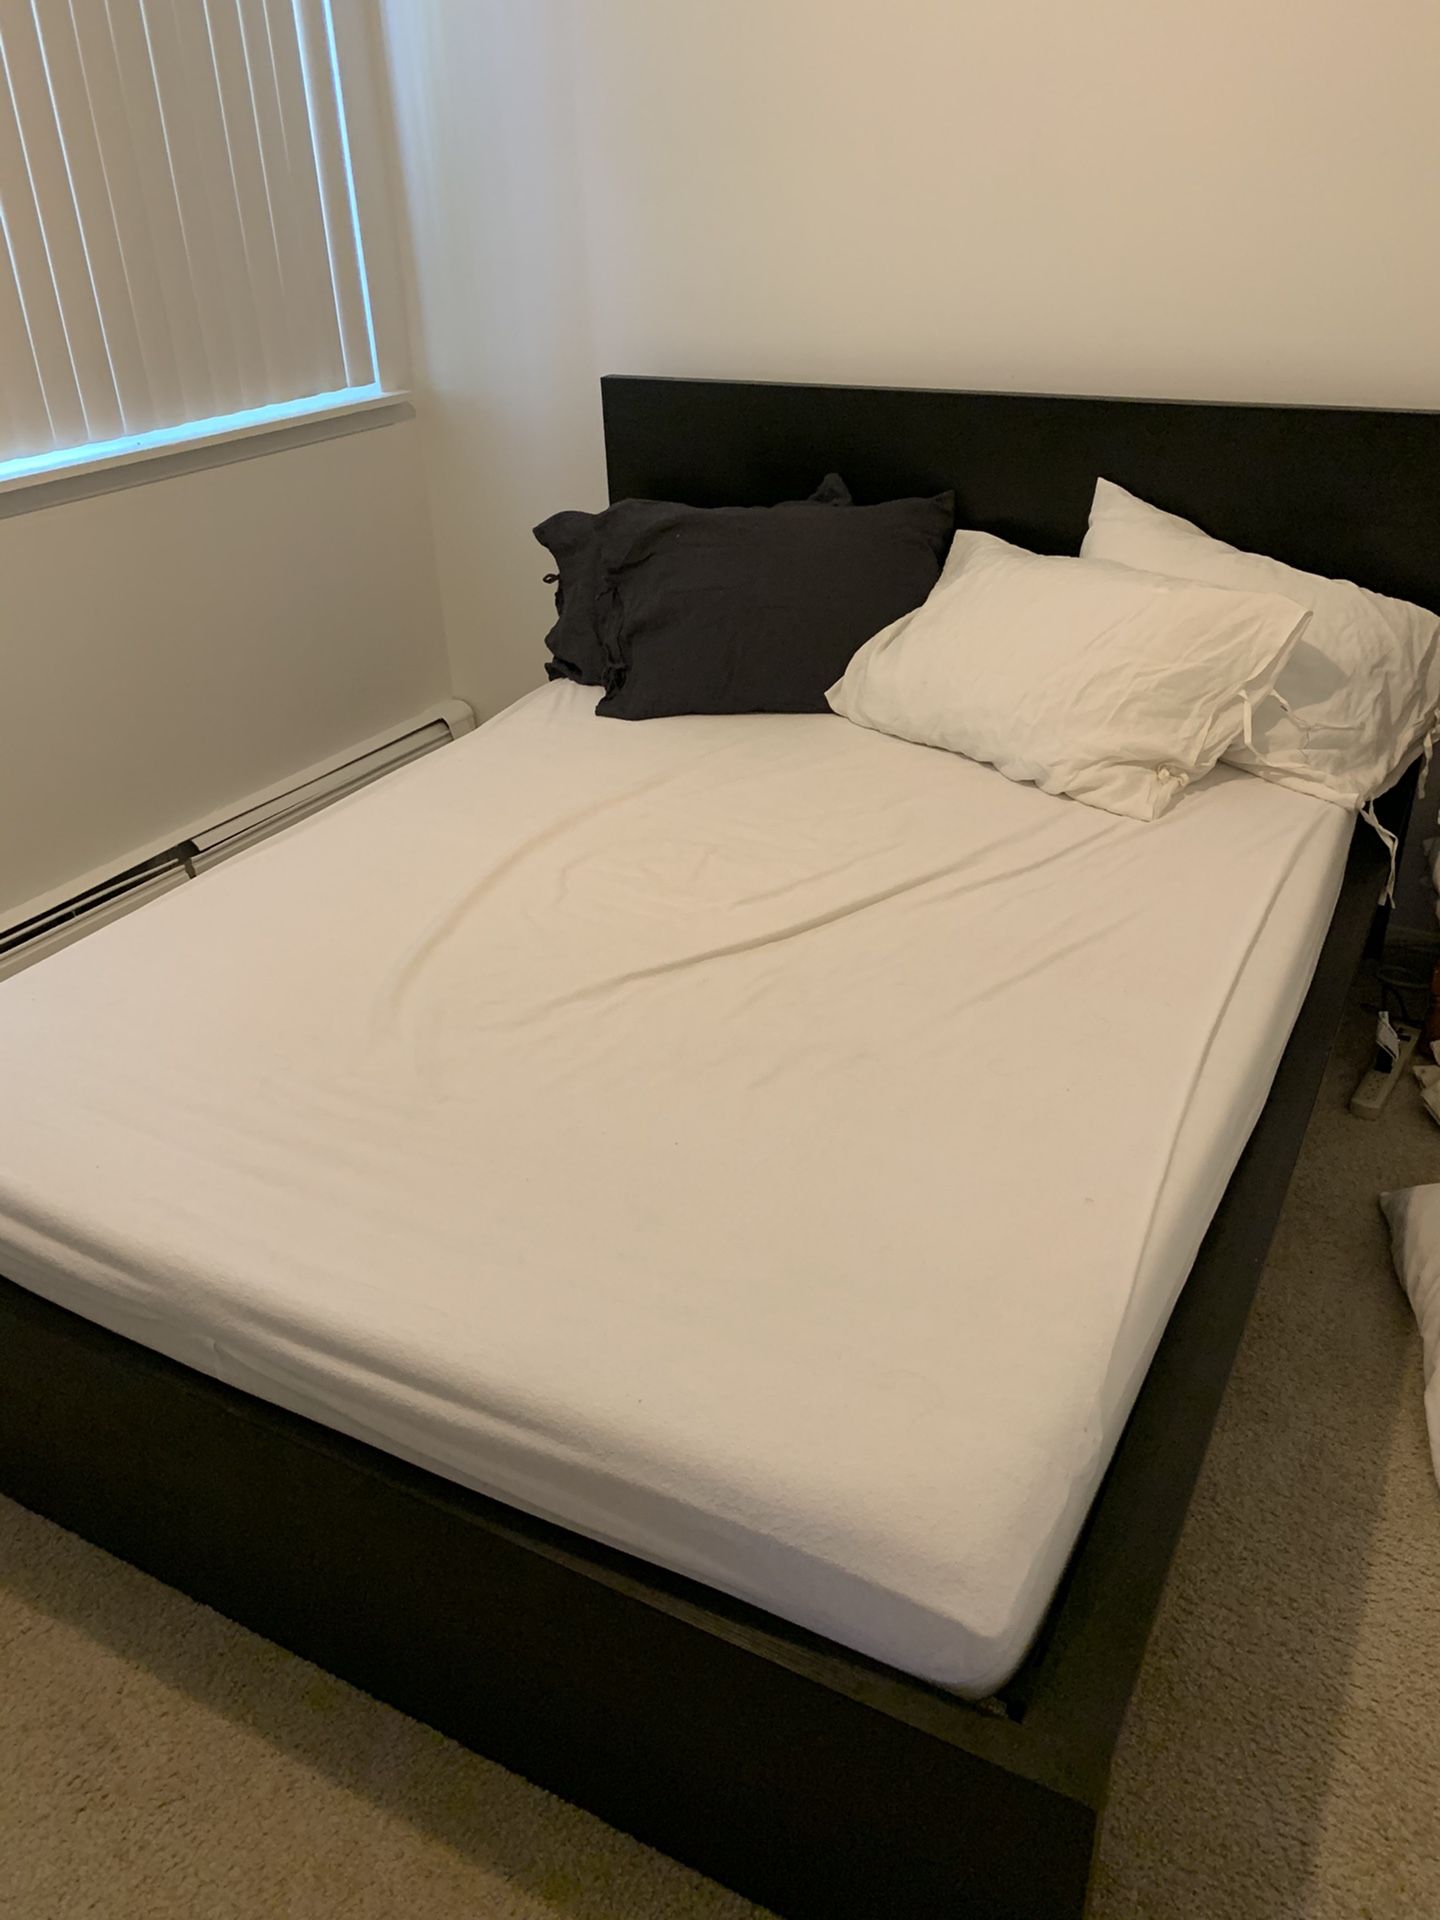 IKEA bed frame and mattress -Queen size